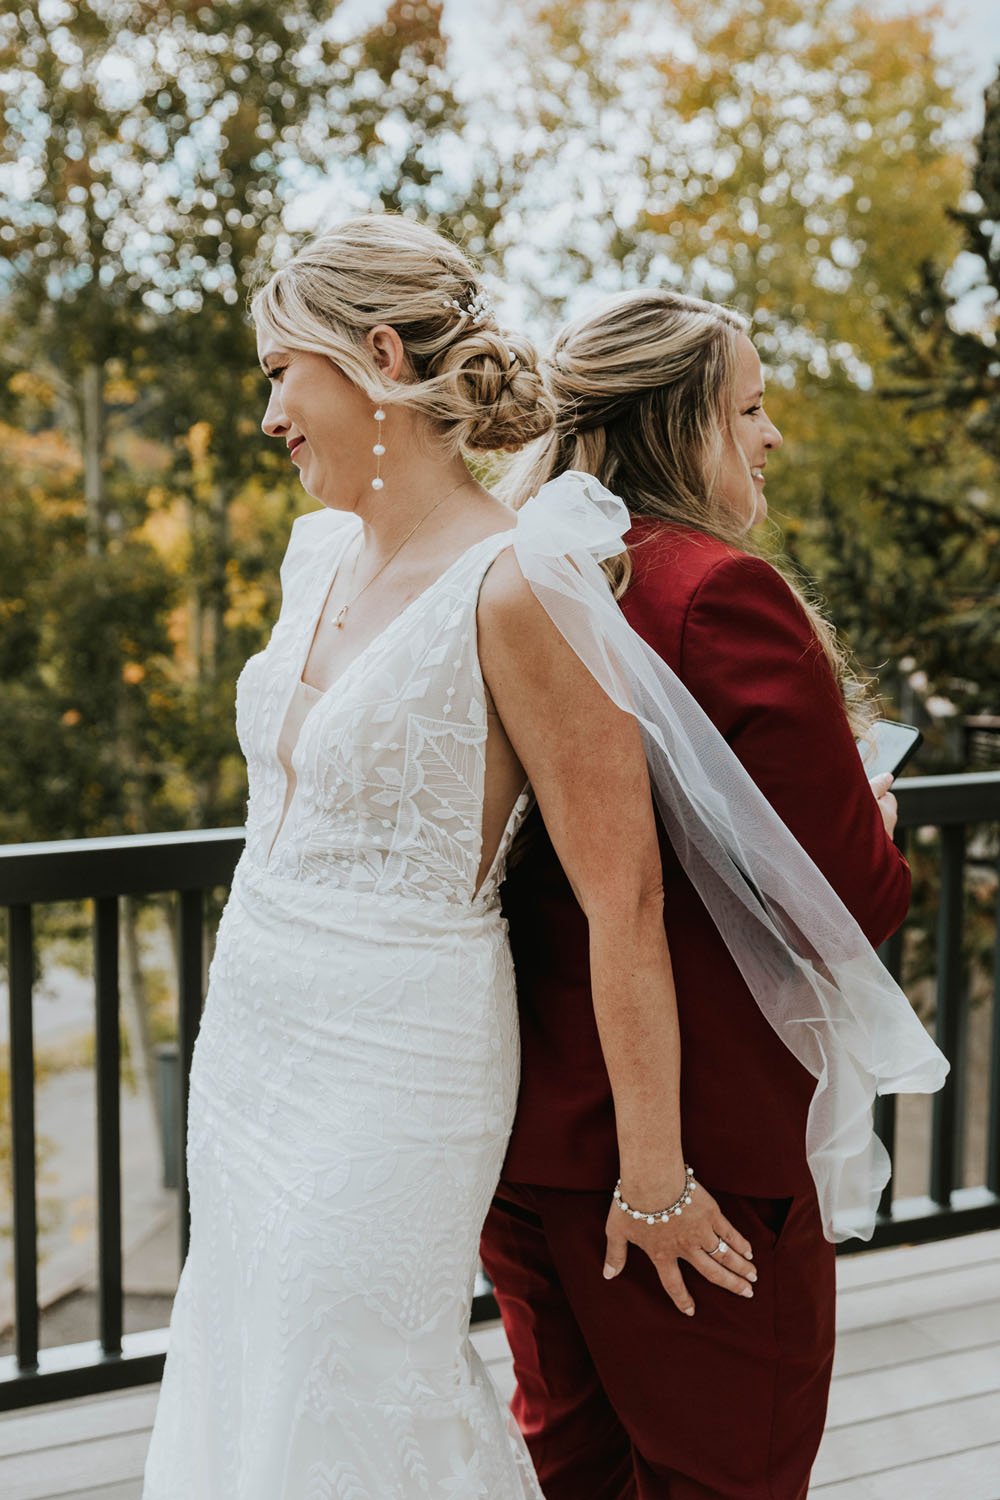  two brides sharing an emotional first look before their wedding ceremony. one bride is wearing the lovely ‘selene’ wedding dress by rish, and the other bride is wearing a burgundy suit. they are standing on a cabin balcony in telluride, colorado 